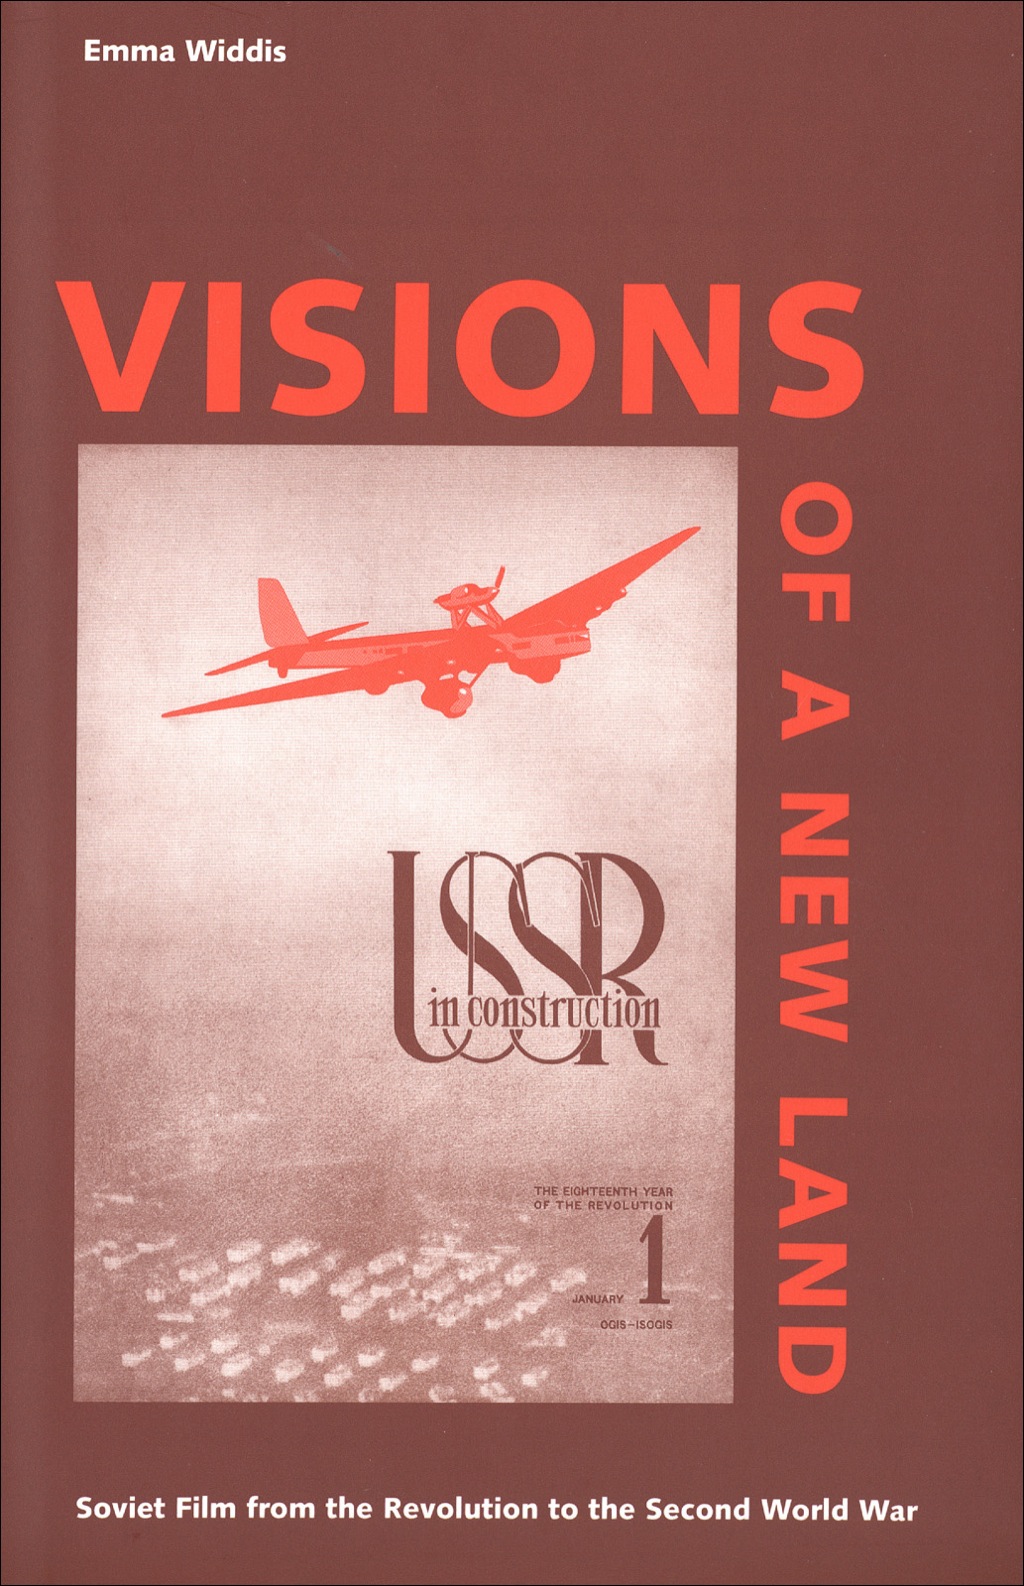 Visions of a New Land: Soviet Film from the Revolution to the Second World War (eBook) - Emma Widdis